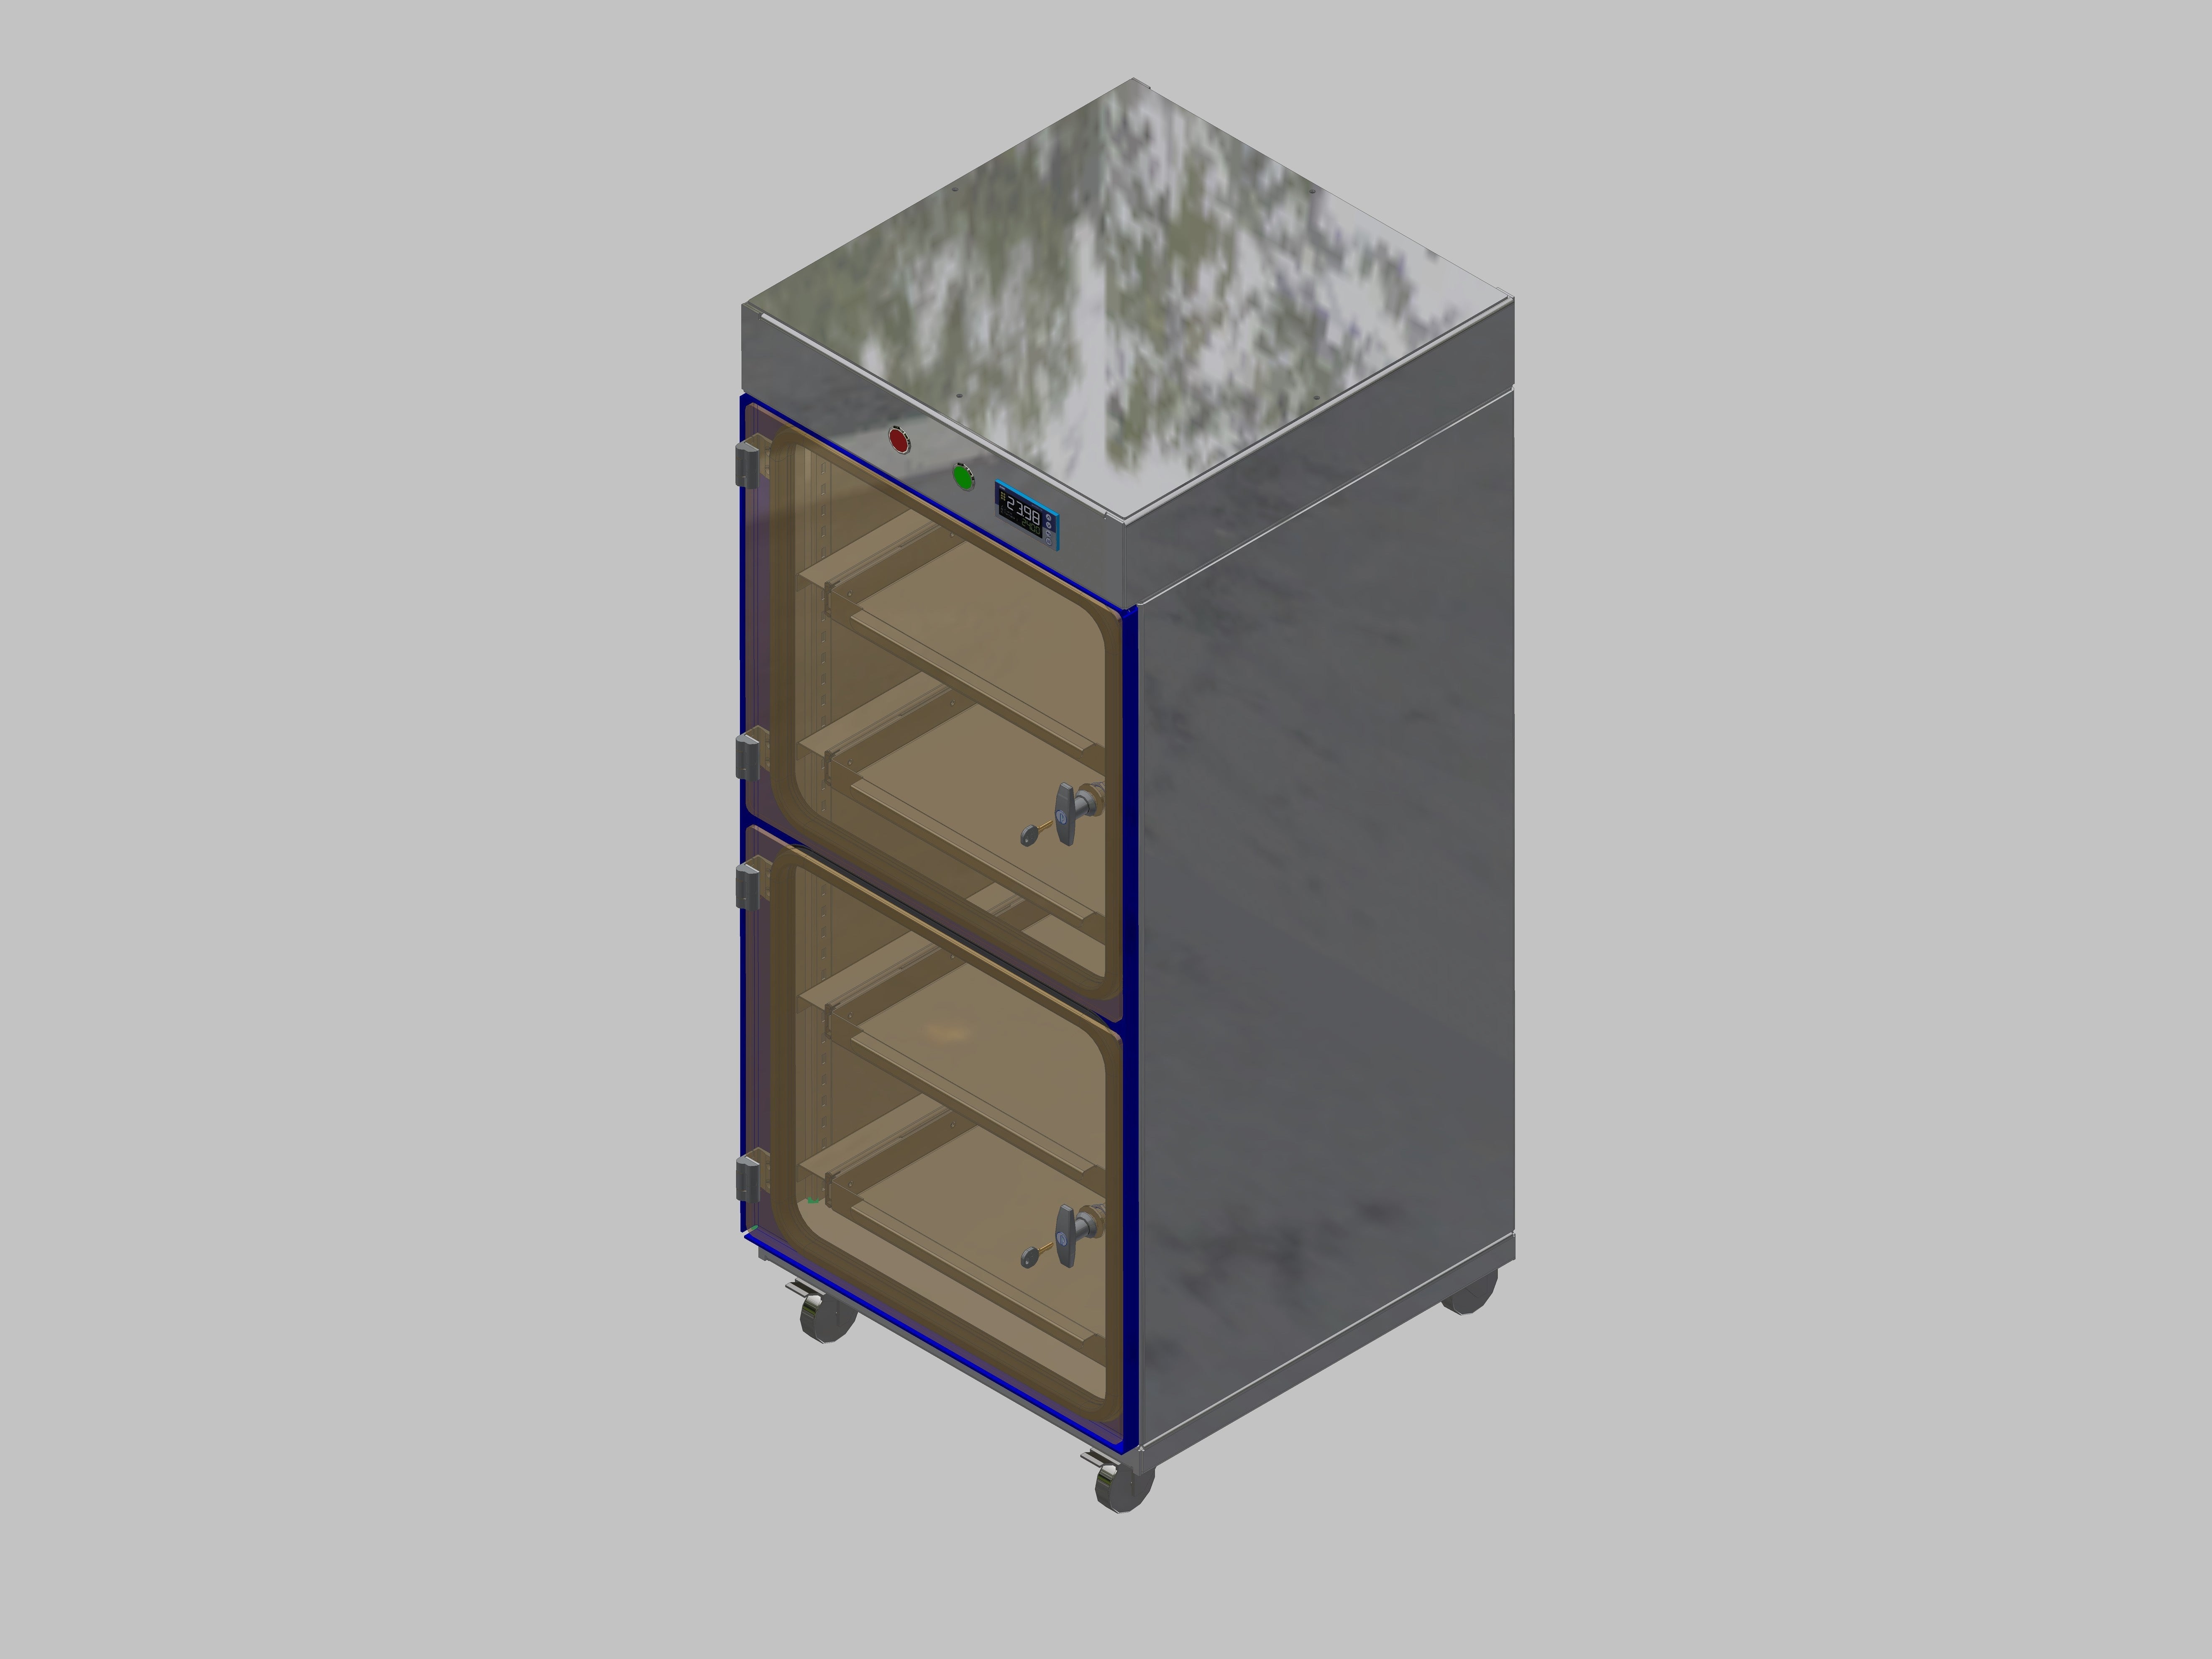 Dry storage cabinet-ITN-600-2 with 2 drawers per compartment and base design with wheels